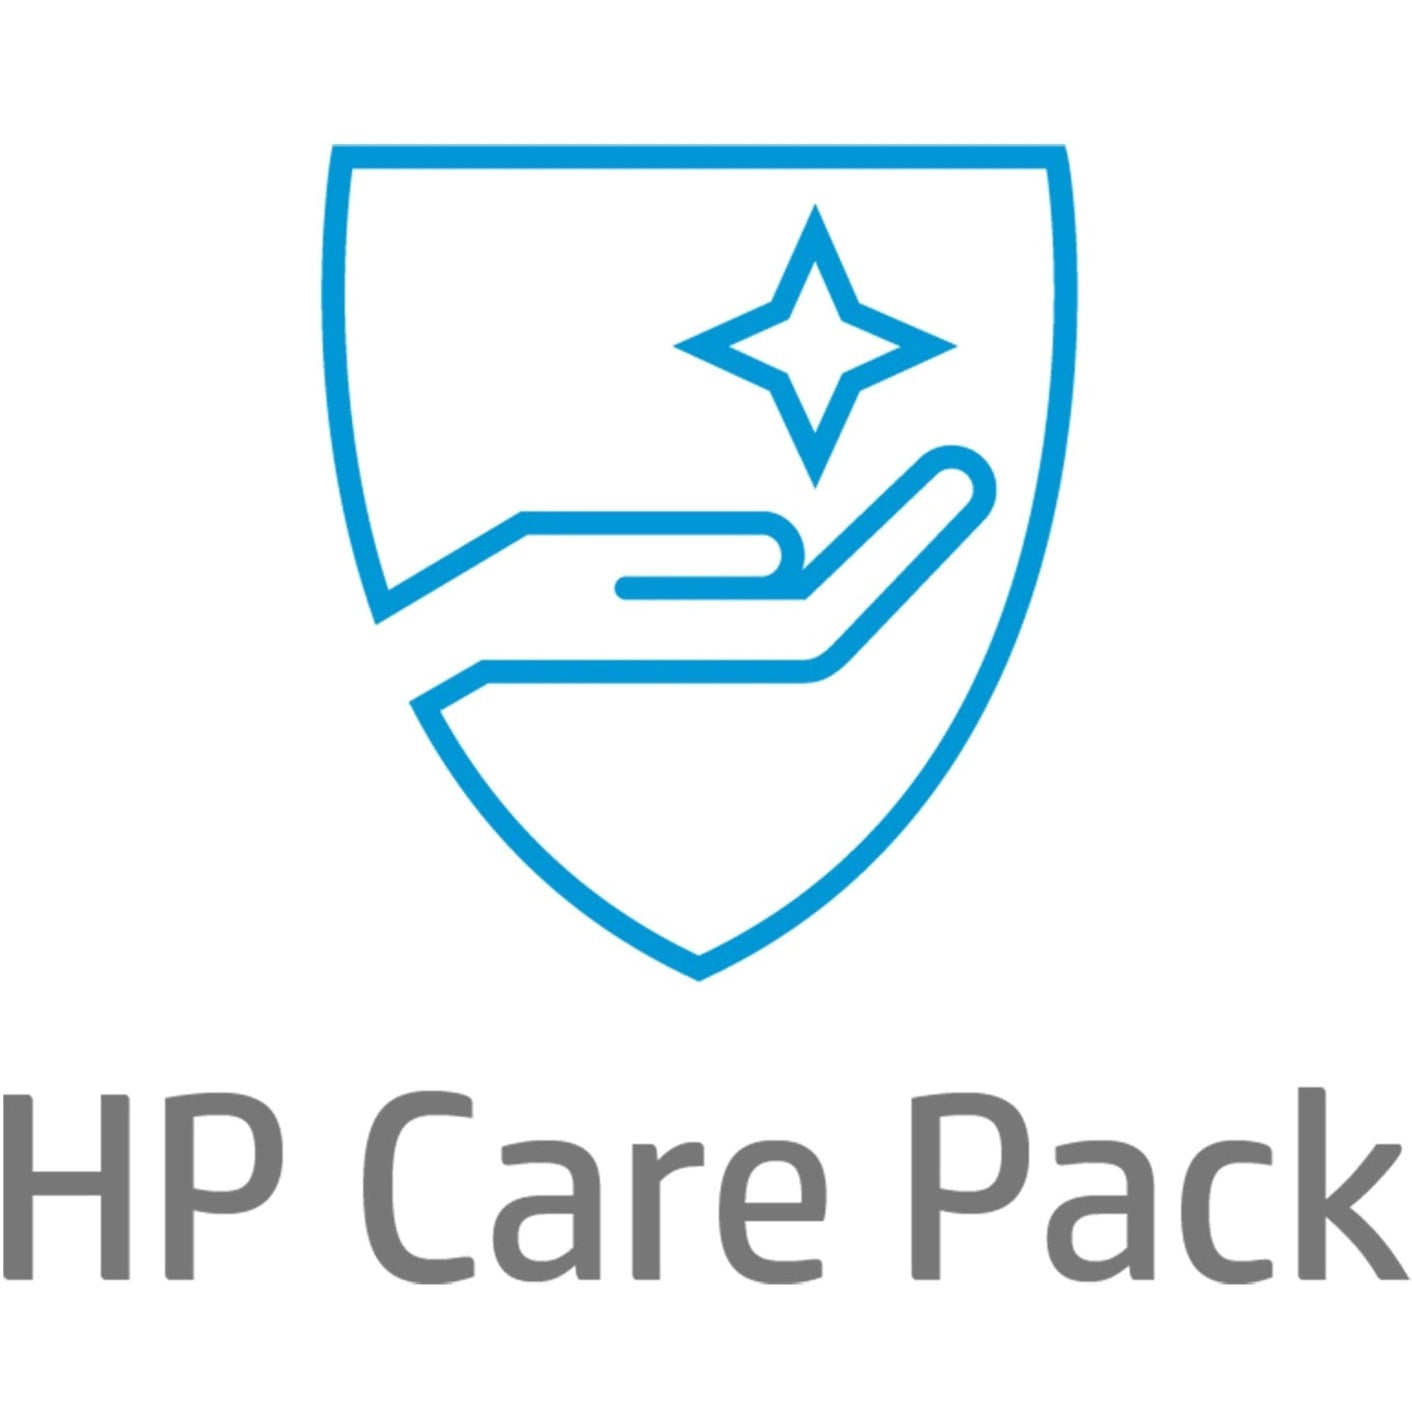 HP Care Pack Hardware Support with Defective Media Retention - 3 Year - Warranty (U9MU6E)